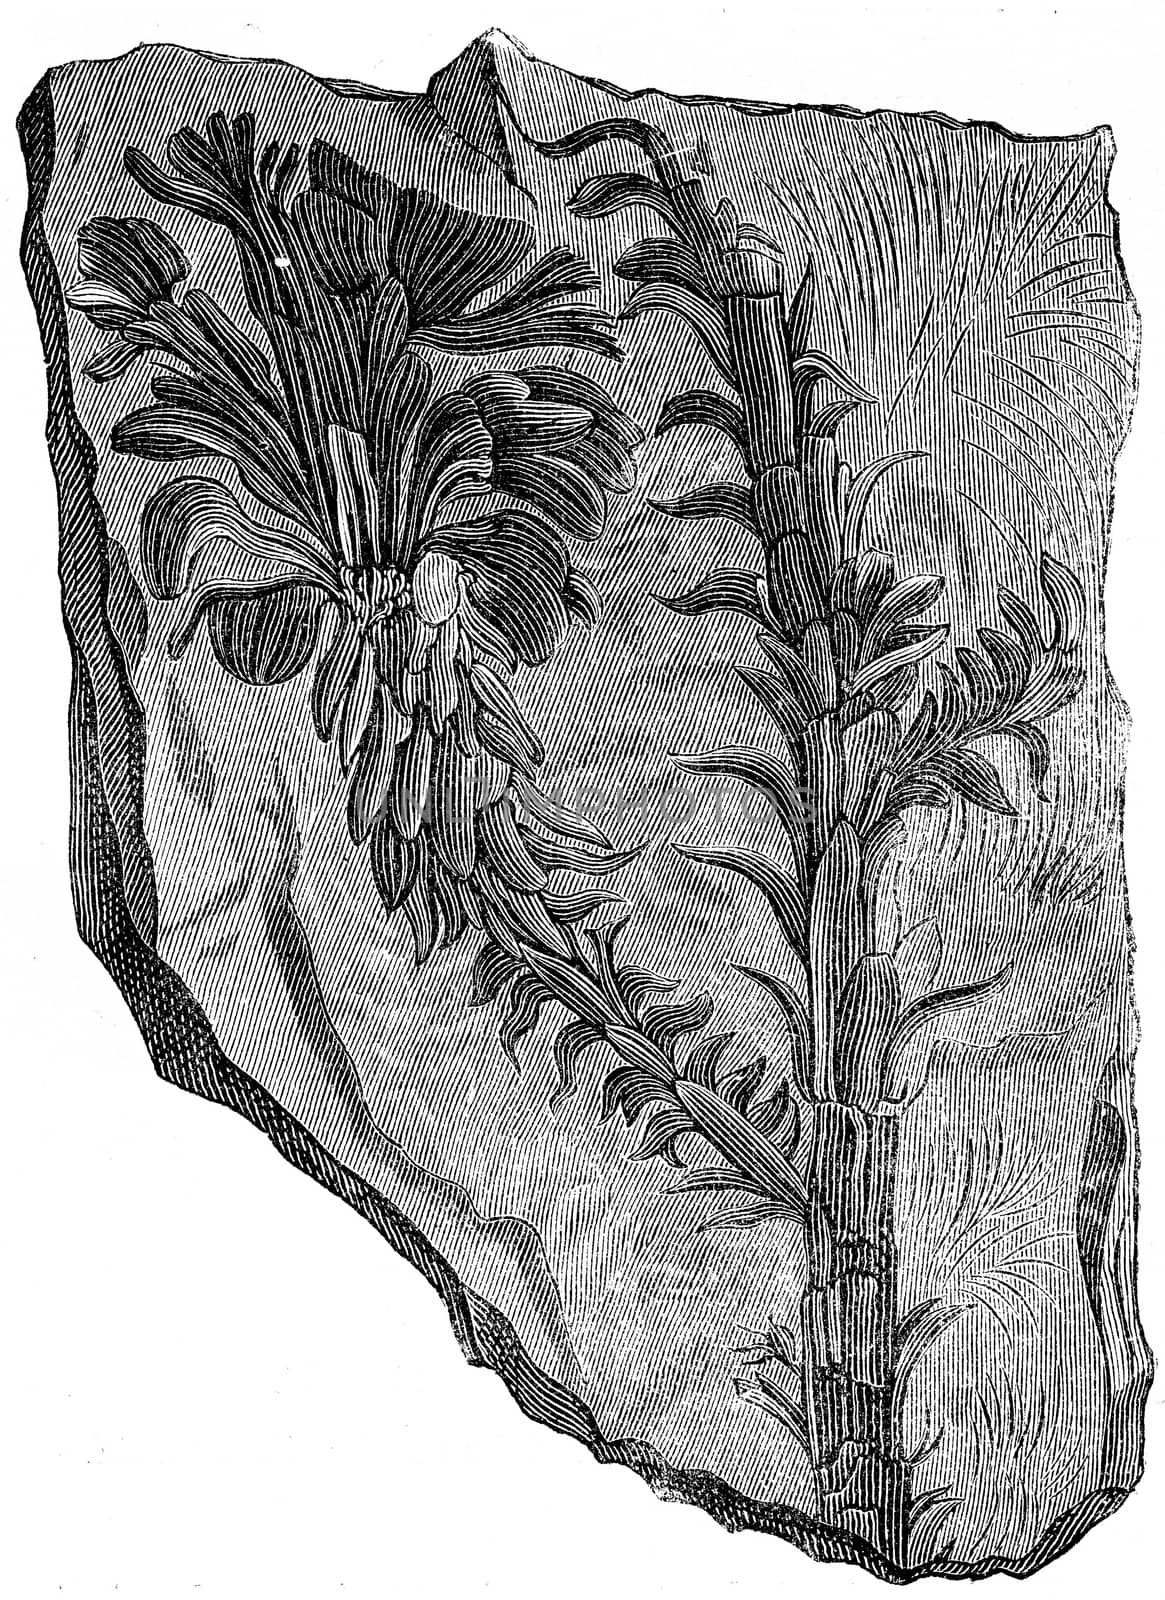 Voltzia heterophylla, Plants of the Triassic period, vintage engraved illustration. Earth before man – 1886.